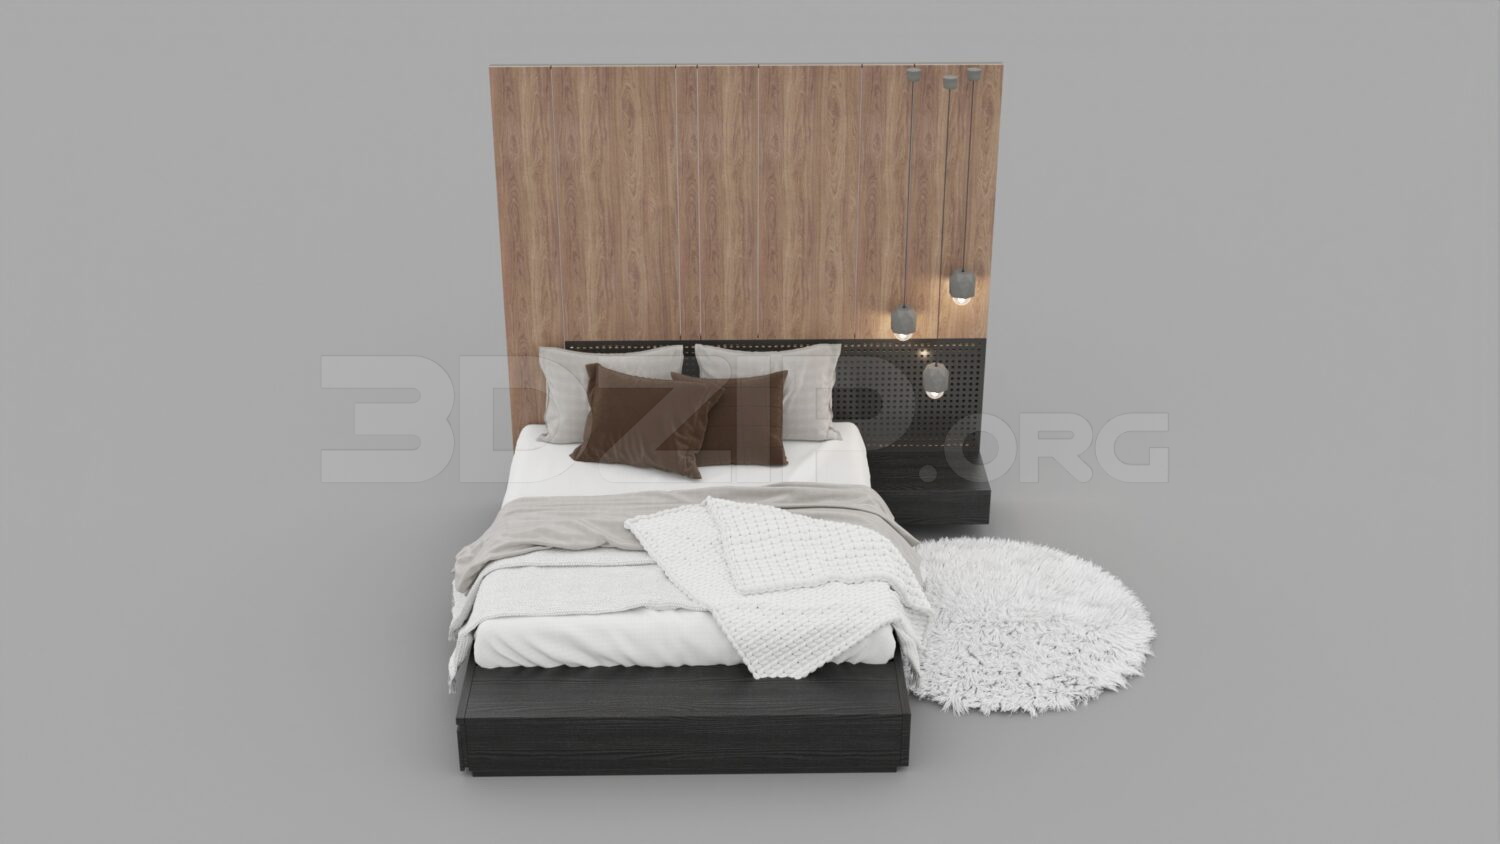 1318. Download Free Bed Model By Nguyen Can